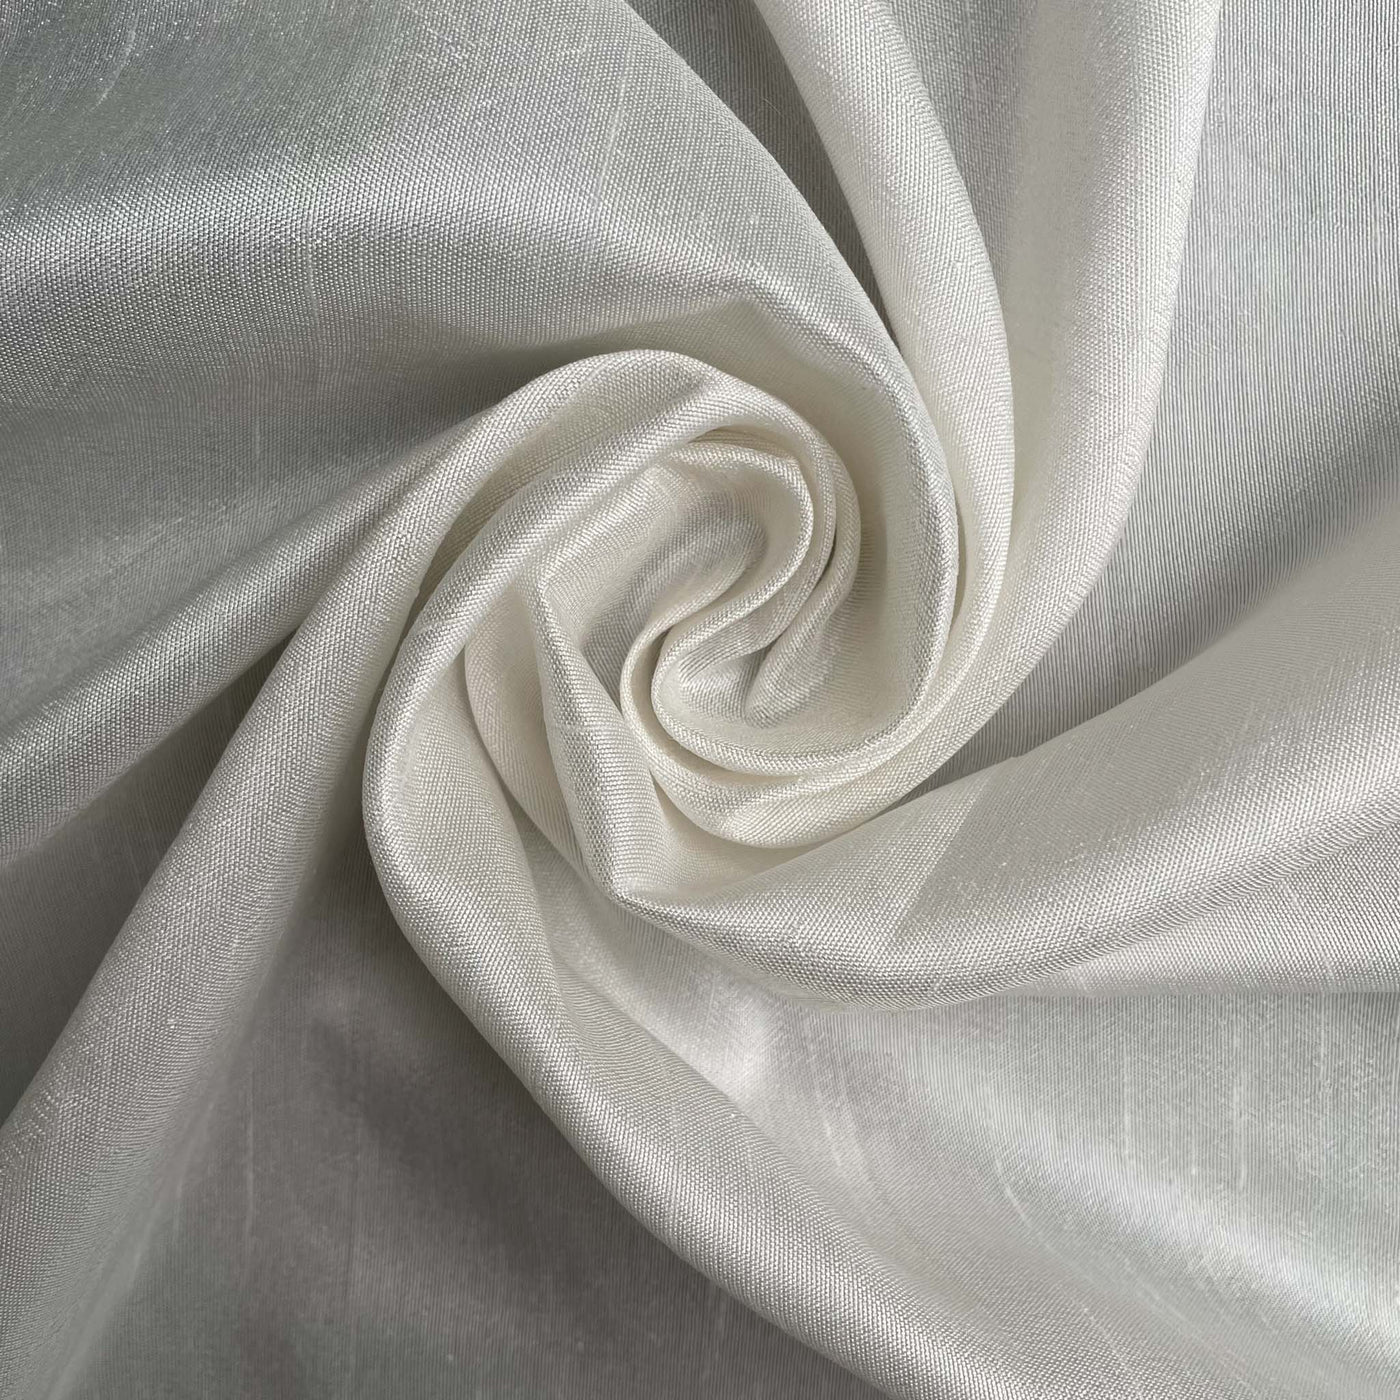 Dyeable Fabric Cut Piece (CUT PIECE) White Dyeable Pure Bemberg Raw Silk Plain Fabric (Width 45 Inches)